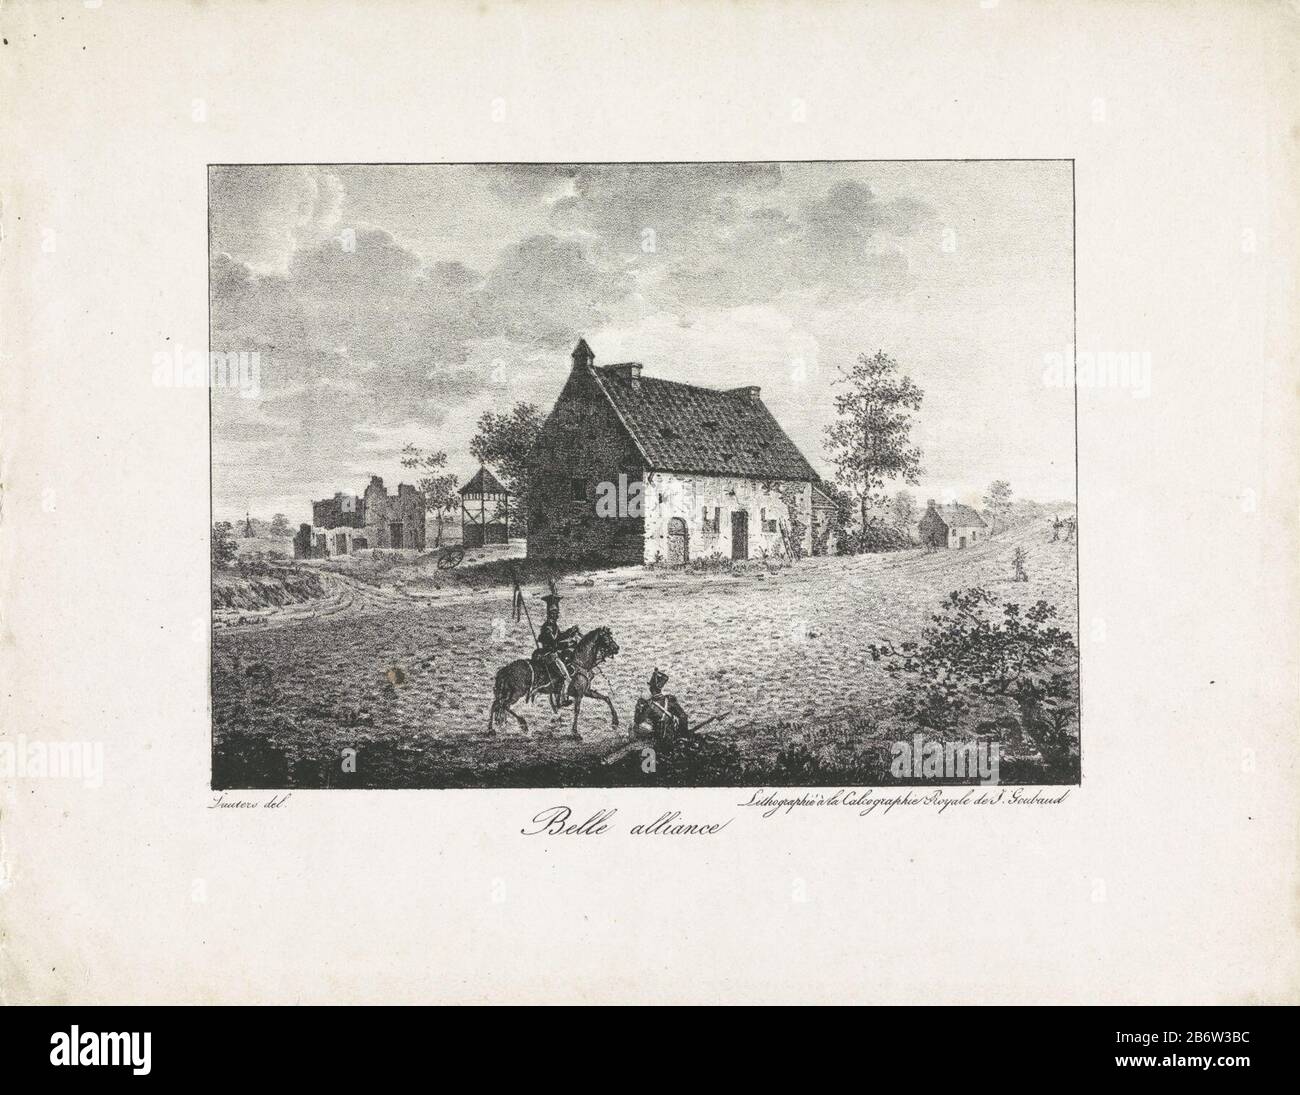 Huis La Belle Alliance Belle alliance (titel op object) The inn La Belle Alliance located in the village of Plancenoit near the battlefield of the Battle of Waterloo on 18 June 1815. two soldiers on the front, one on horseback, the other sitting on the grond. Manufacturer : printmaker, Paul Lauters (listed building) printer: Calcographie Royale J. Goubaud (listed property) Place manufacture: Belgium Date: 1820 - 1850 Physical features: lithography material: paper technique: lithography (technique) Dimensions: sheet: h 238 mm × W 304 mm Subject: devastated, ruined place or city (~ warfare) Batt Stock Photo